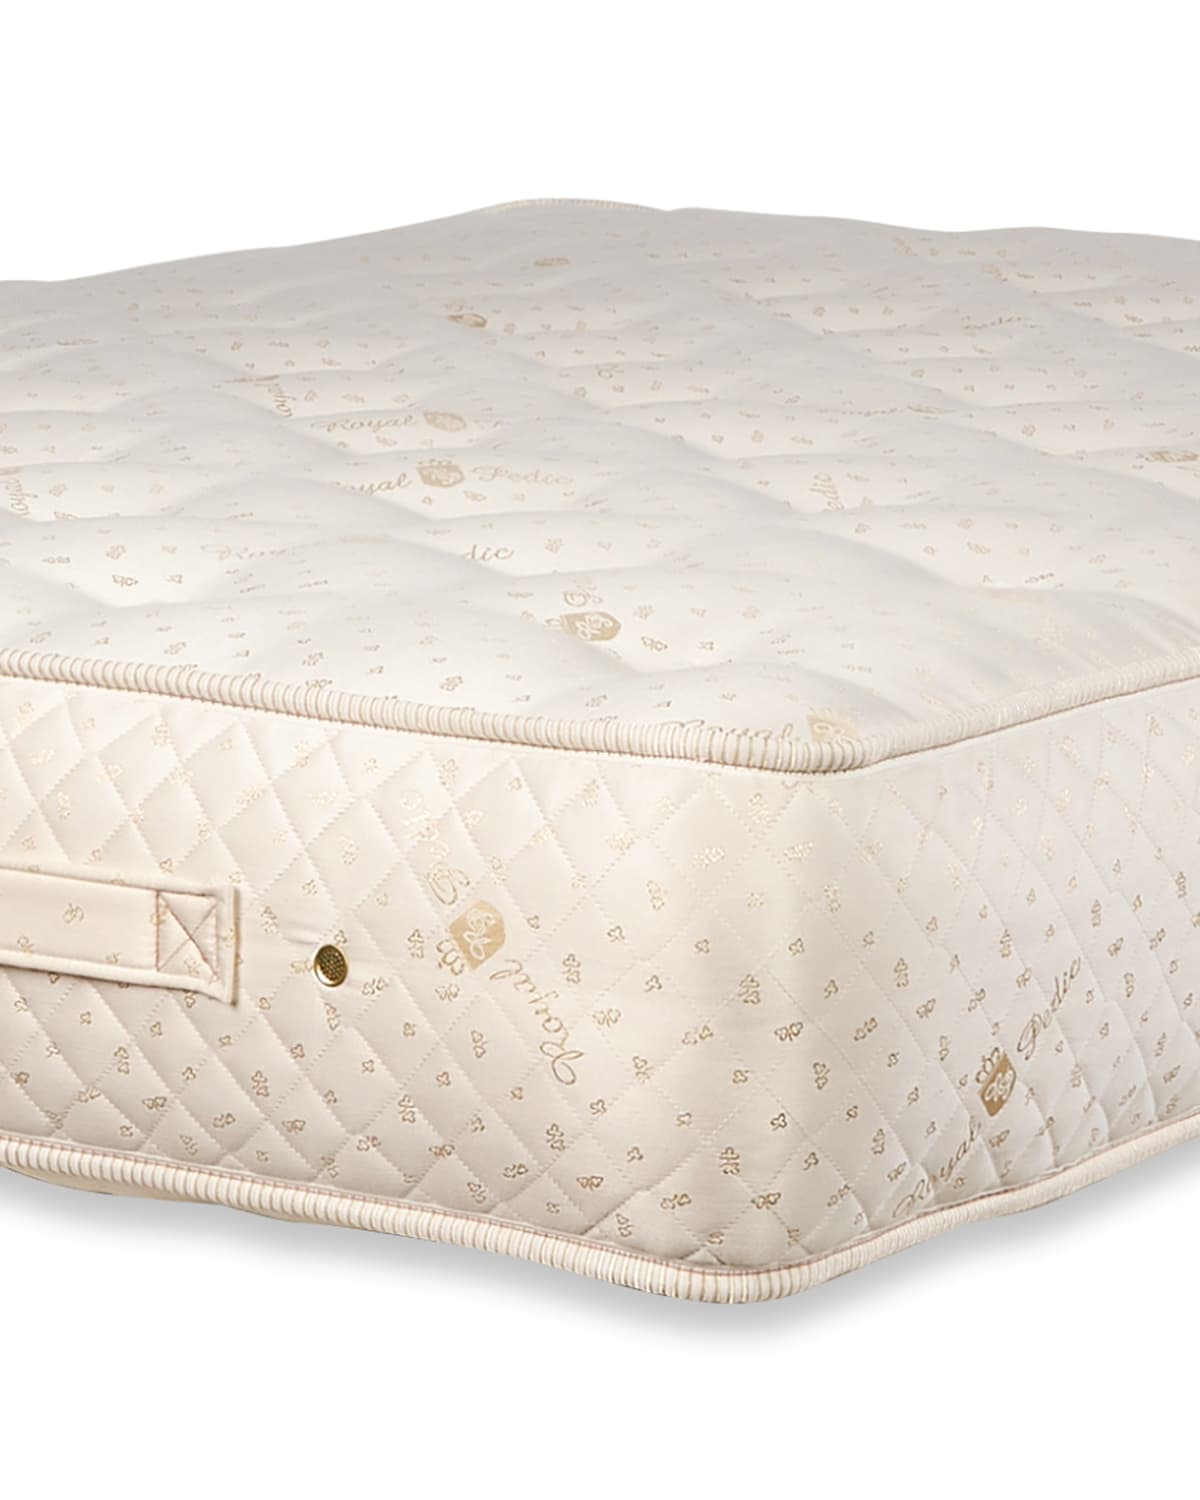 Royal-pedic Dream Spring Ultimate Firm Queen Mattress In Gold